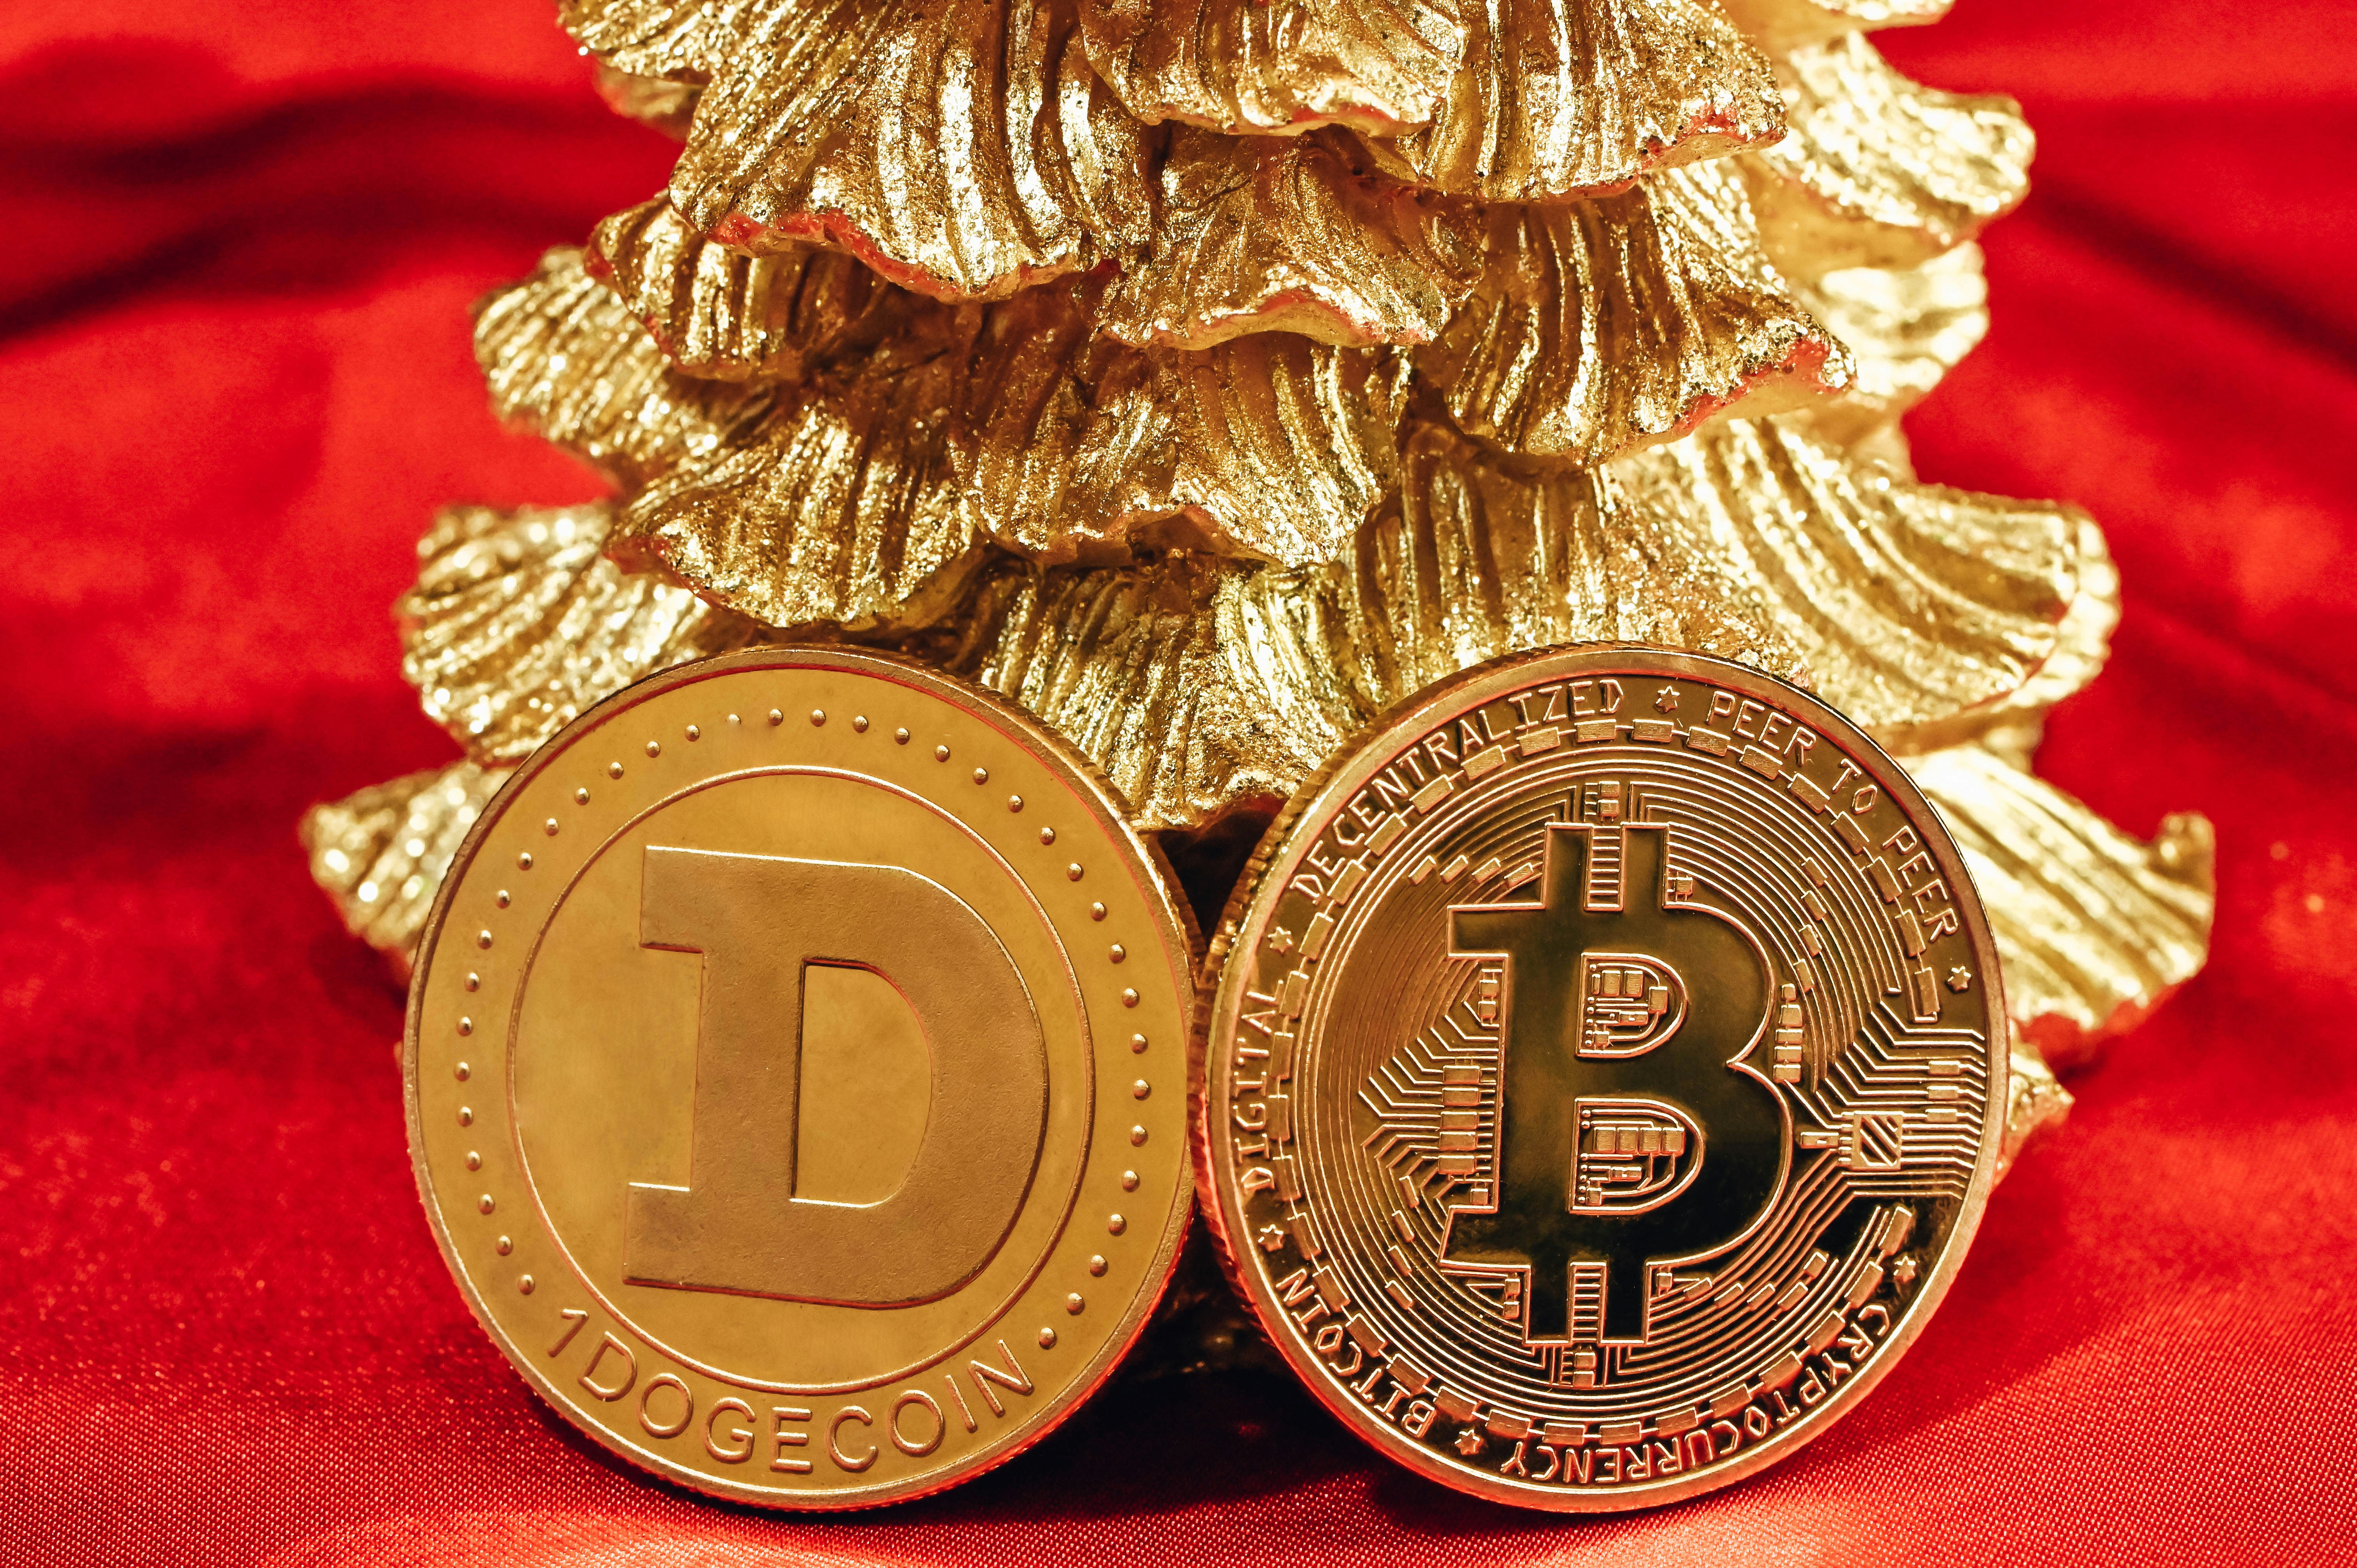 DOGE coin and Bitcoin leaning on a pine tree on red velvet